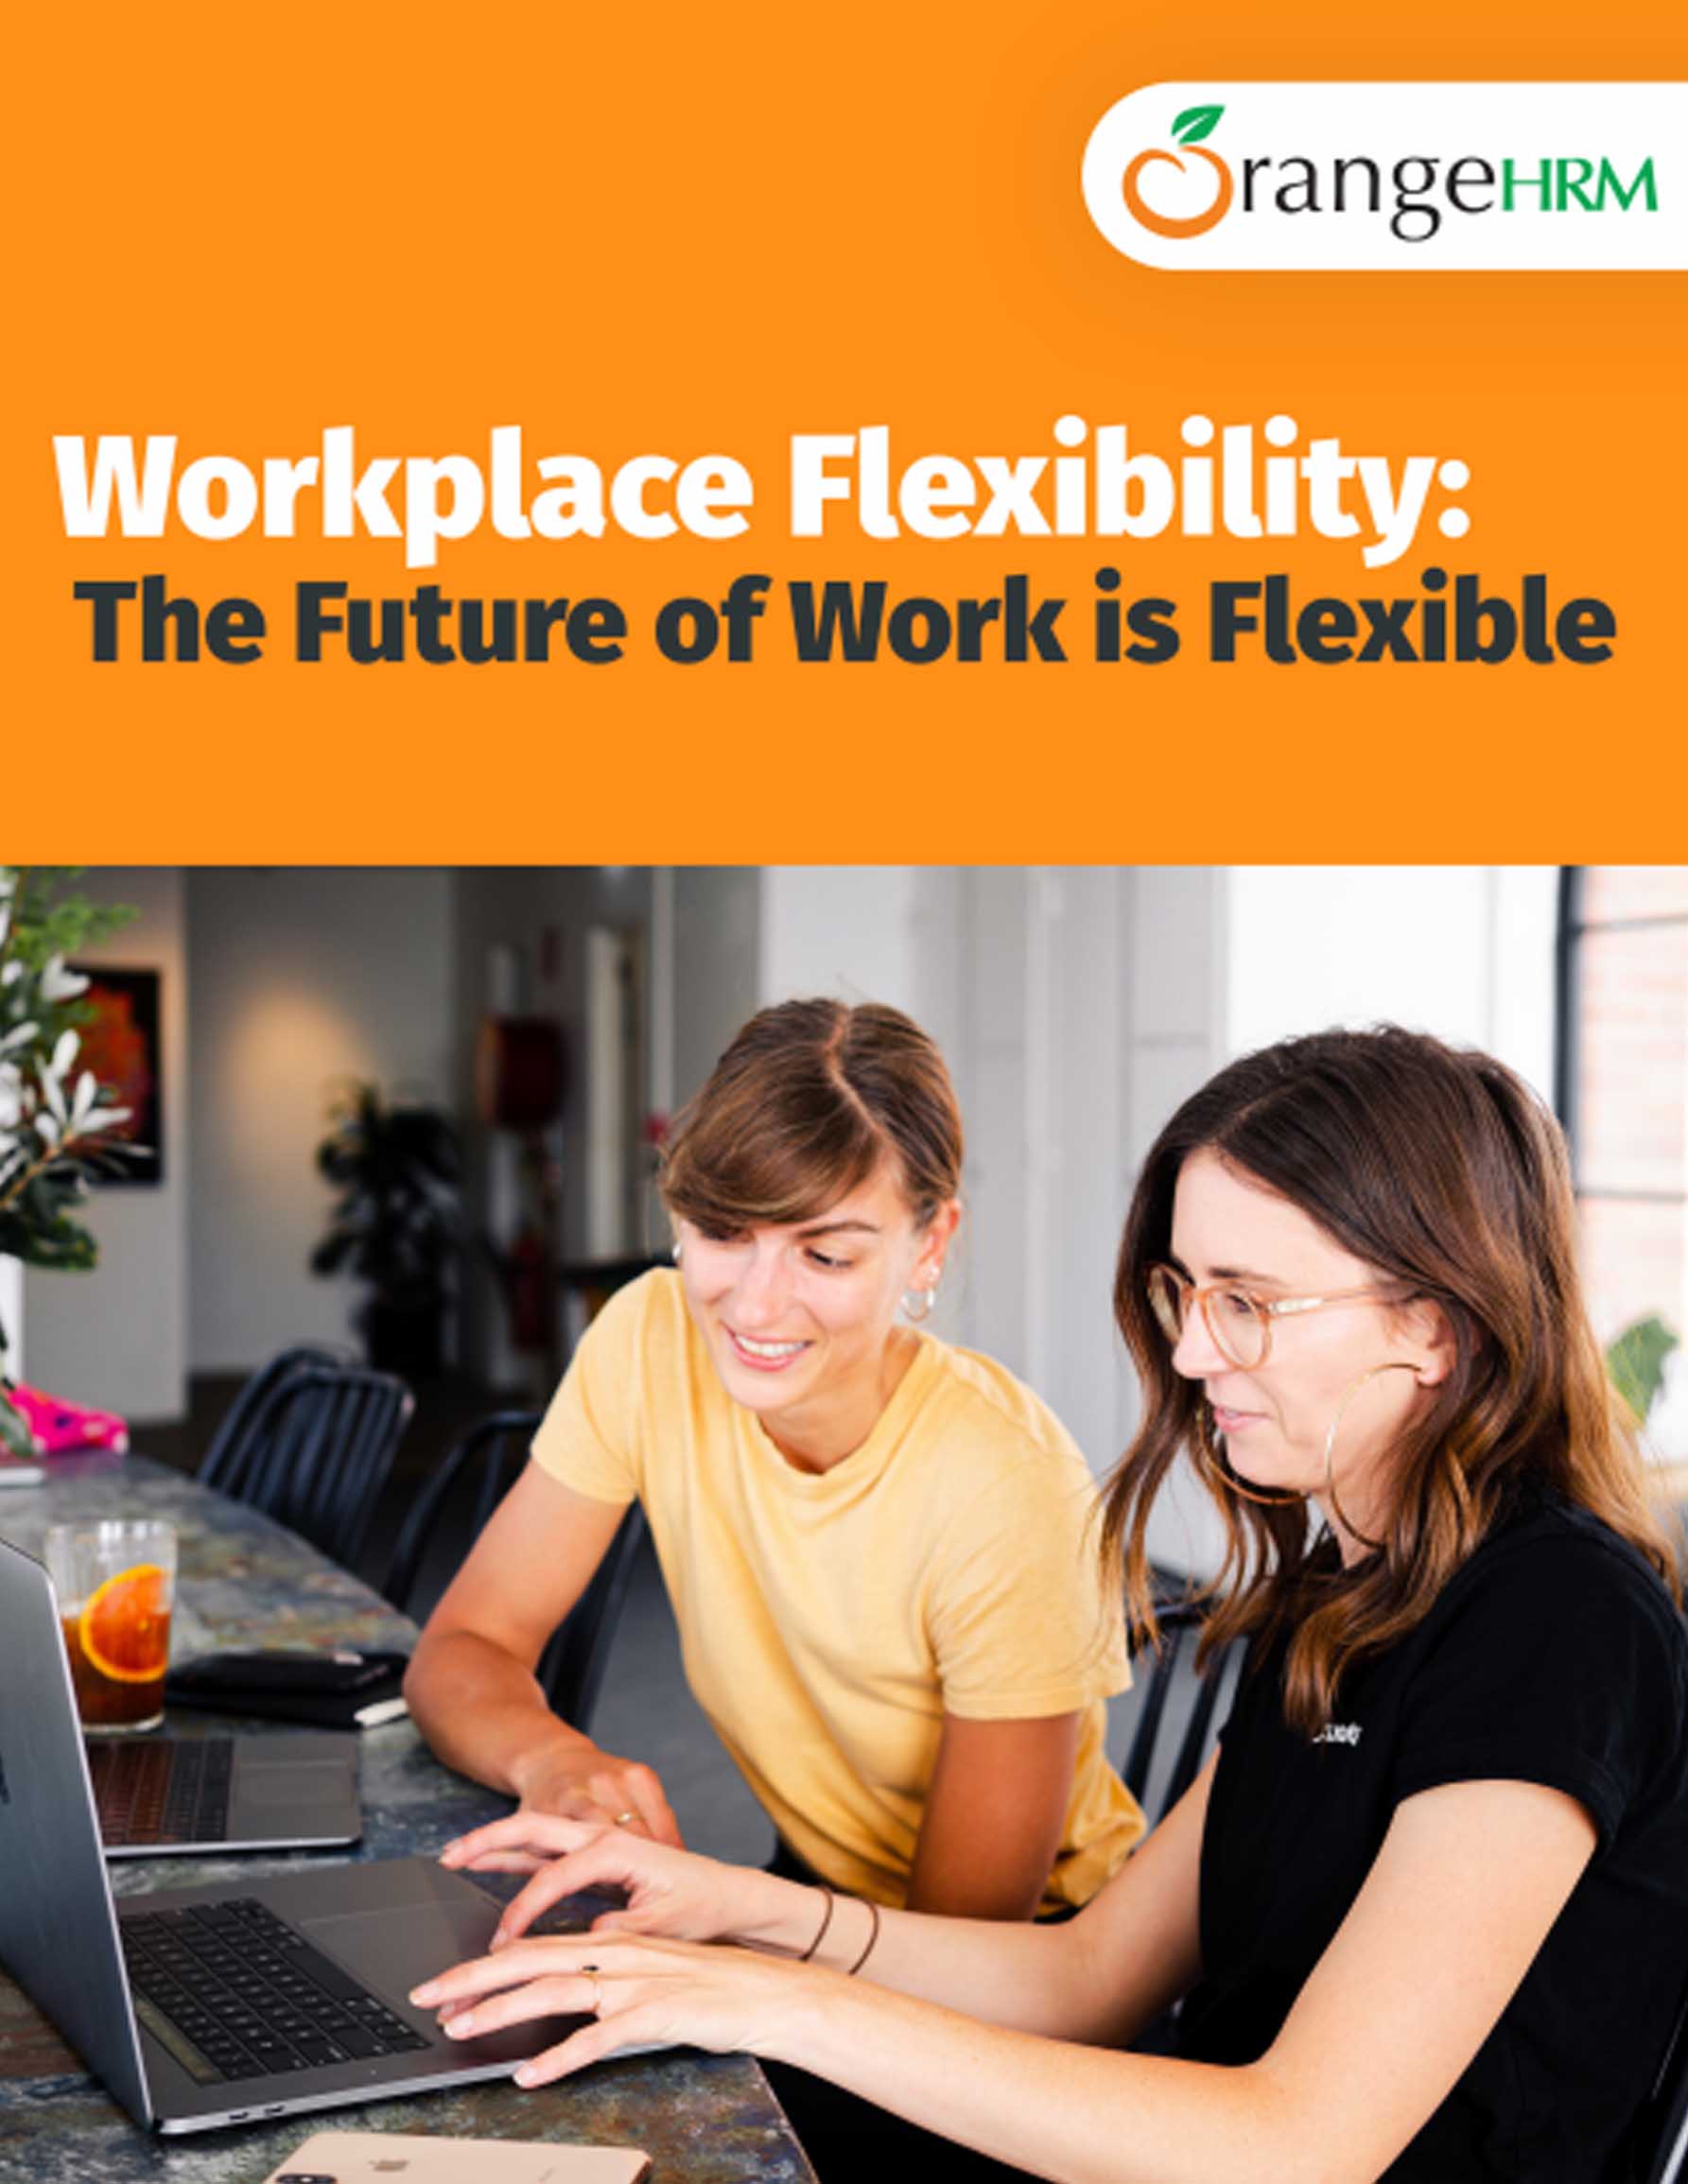 Workplace Flexibility The Future of Work is Flexible